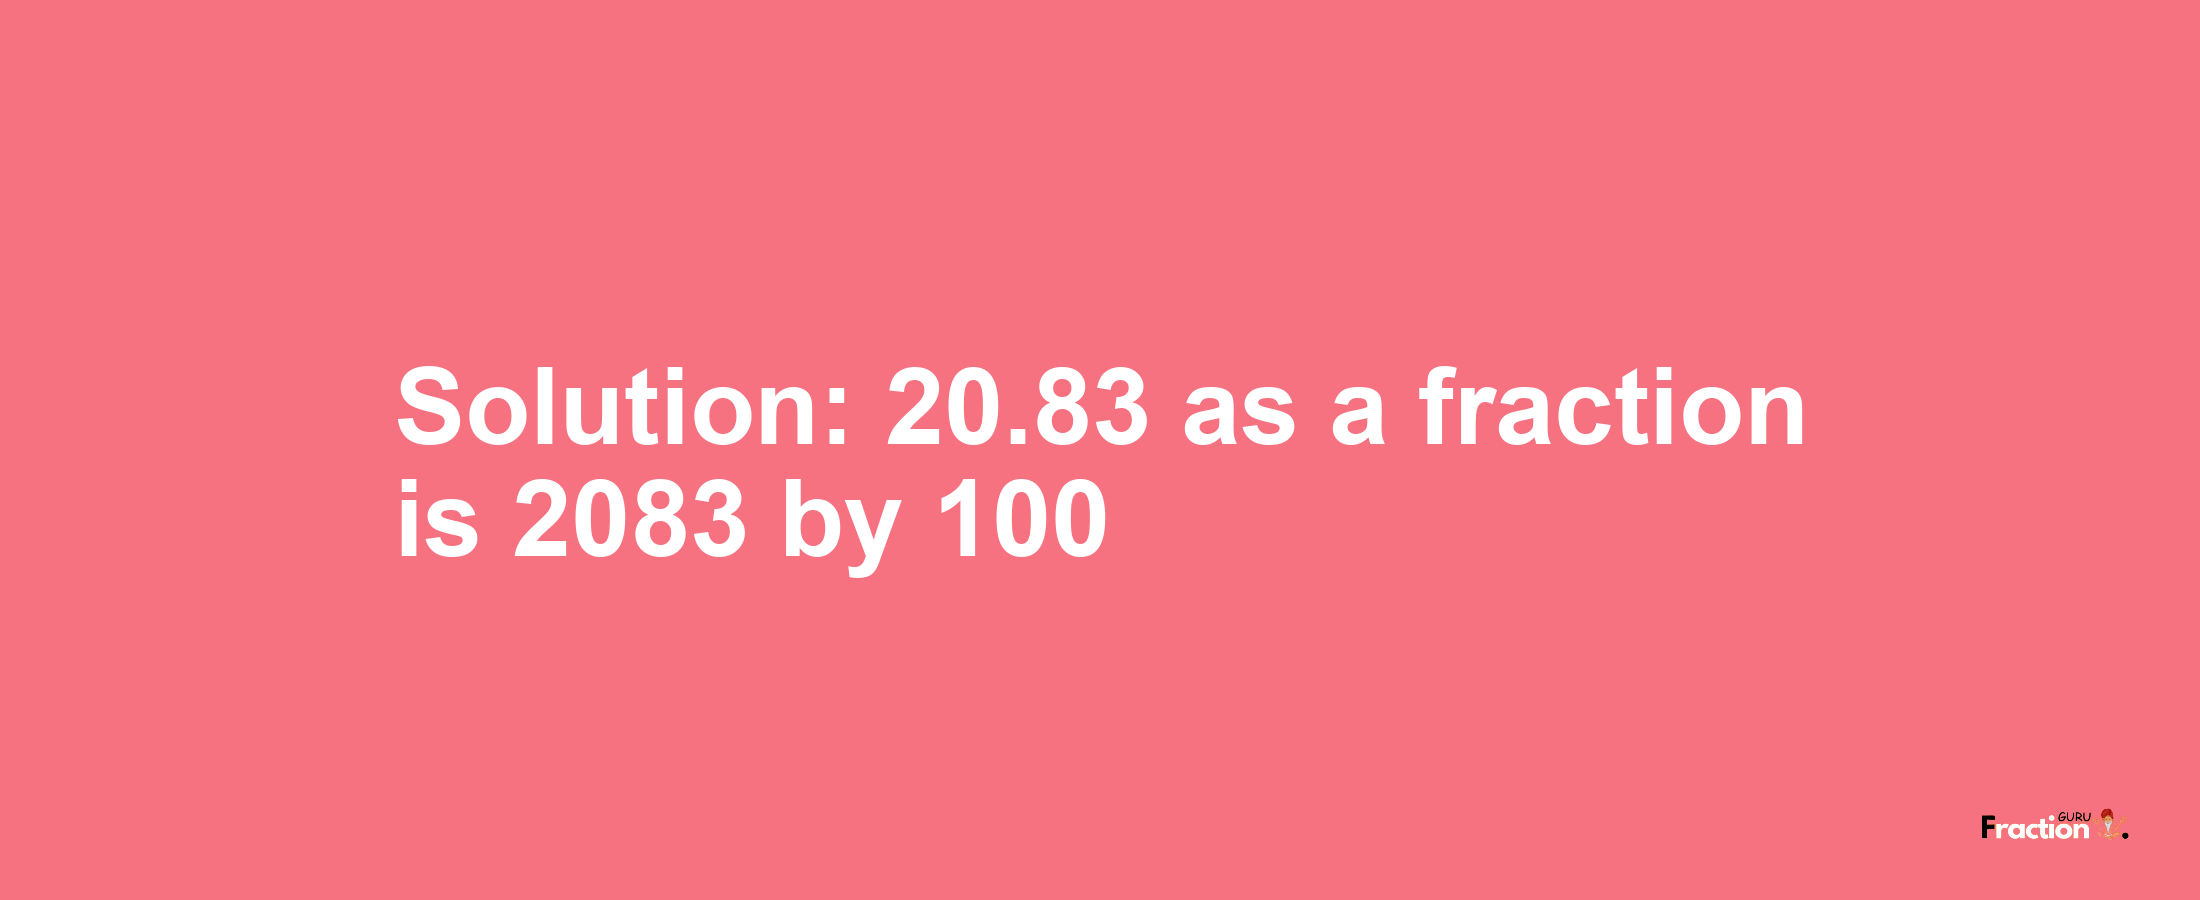 Solution:20.83 as a fraction is 2083/100